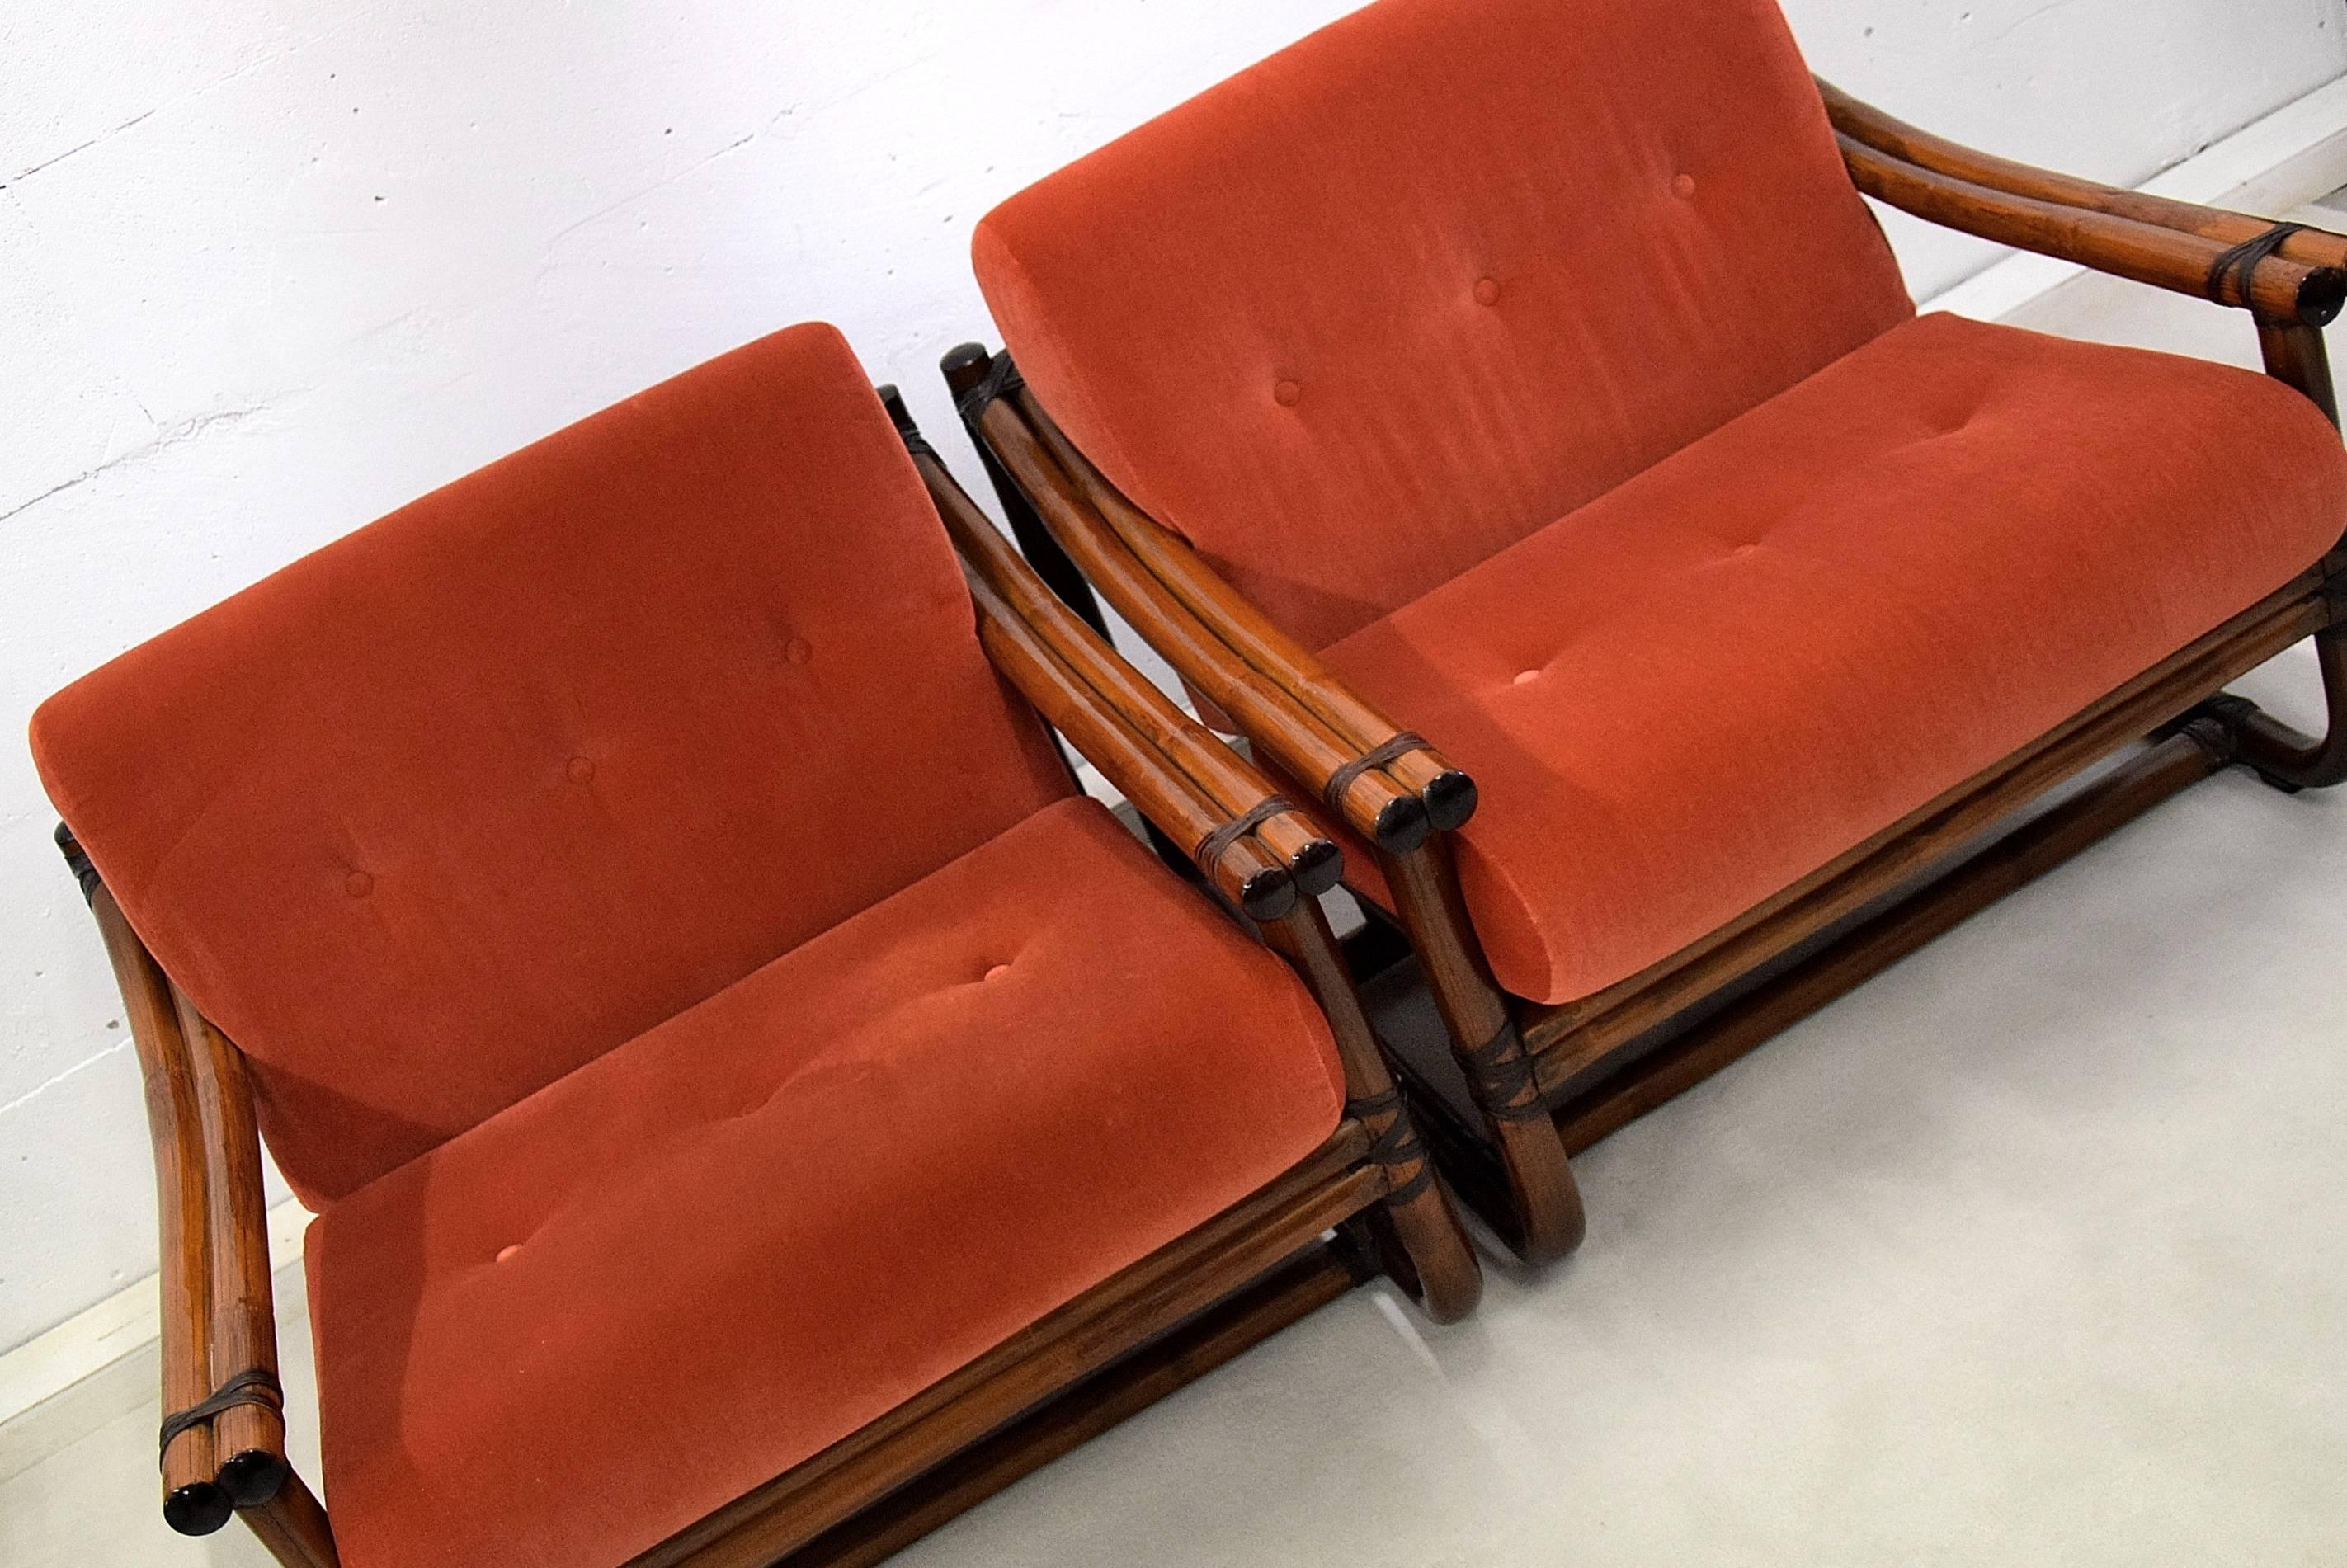 Beautiful Bamboo Italian made mid century modern lounge set
Gorgeous and classy Italian made set of two chairs and one hocker in fantastic condition. The bamboo has a wonderful patina and with the brick orange veluto upholstery it is truly beautiful